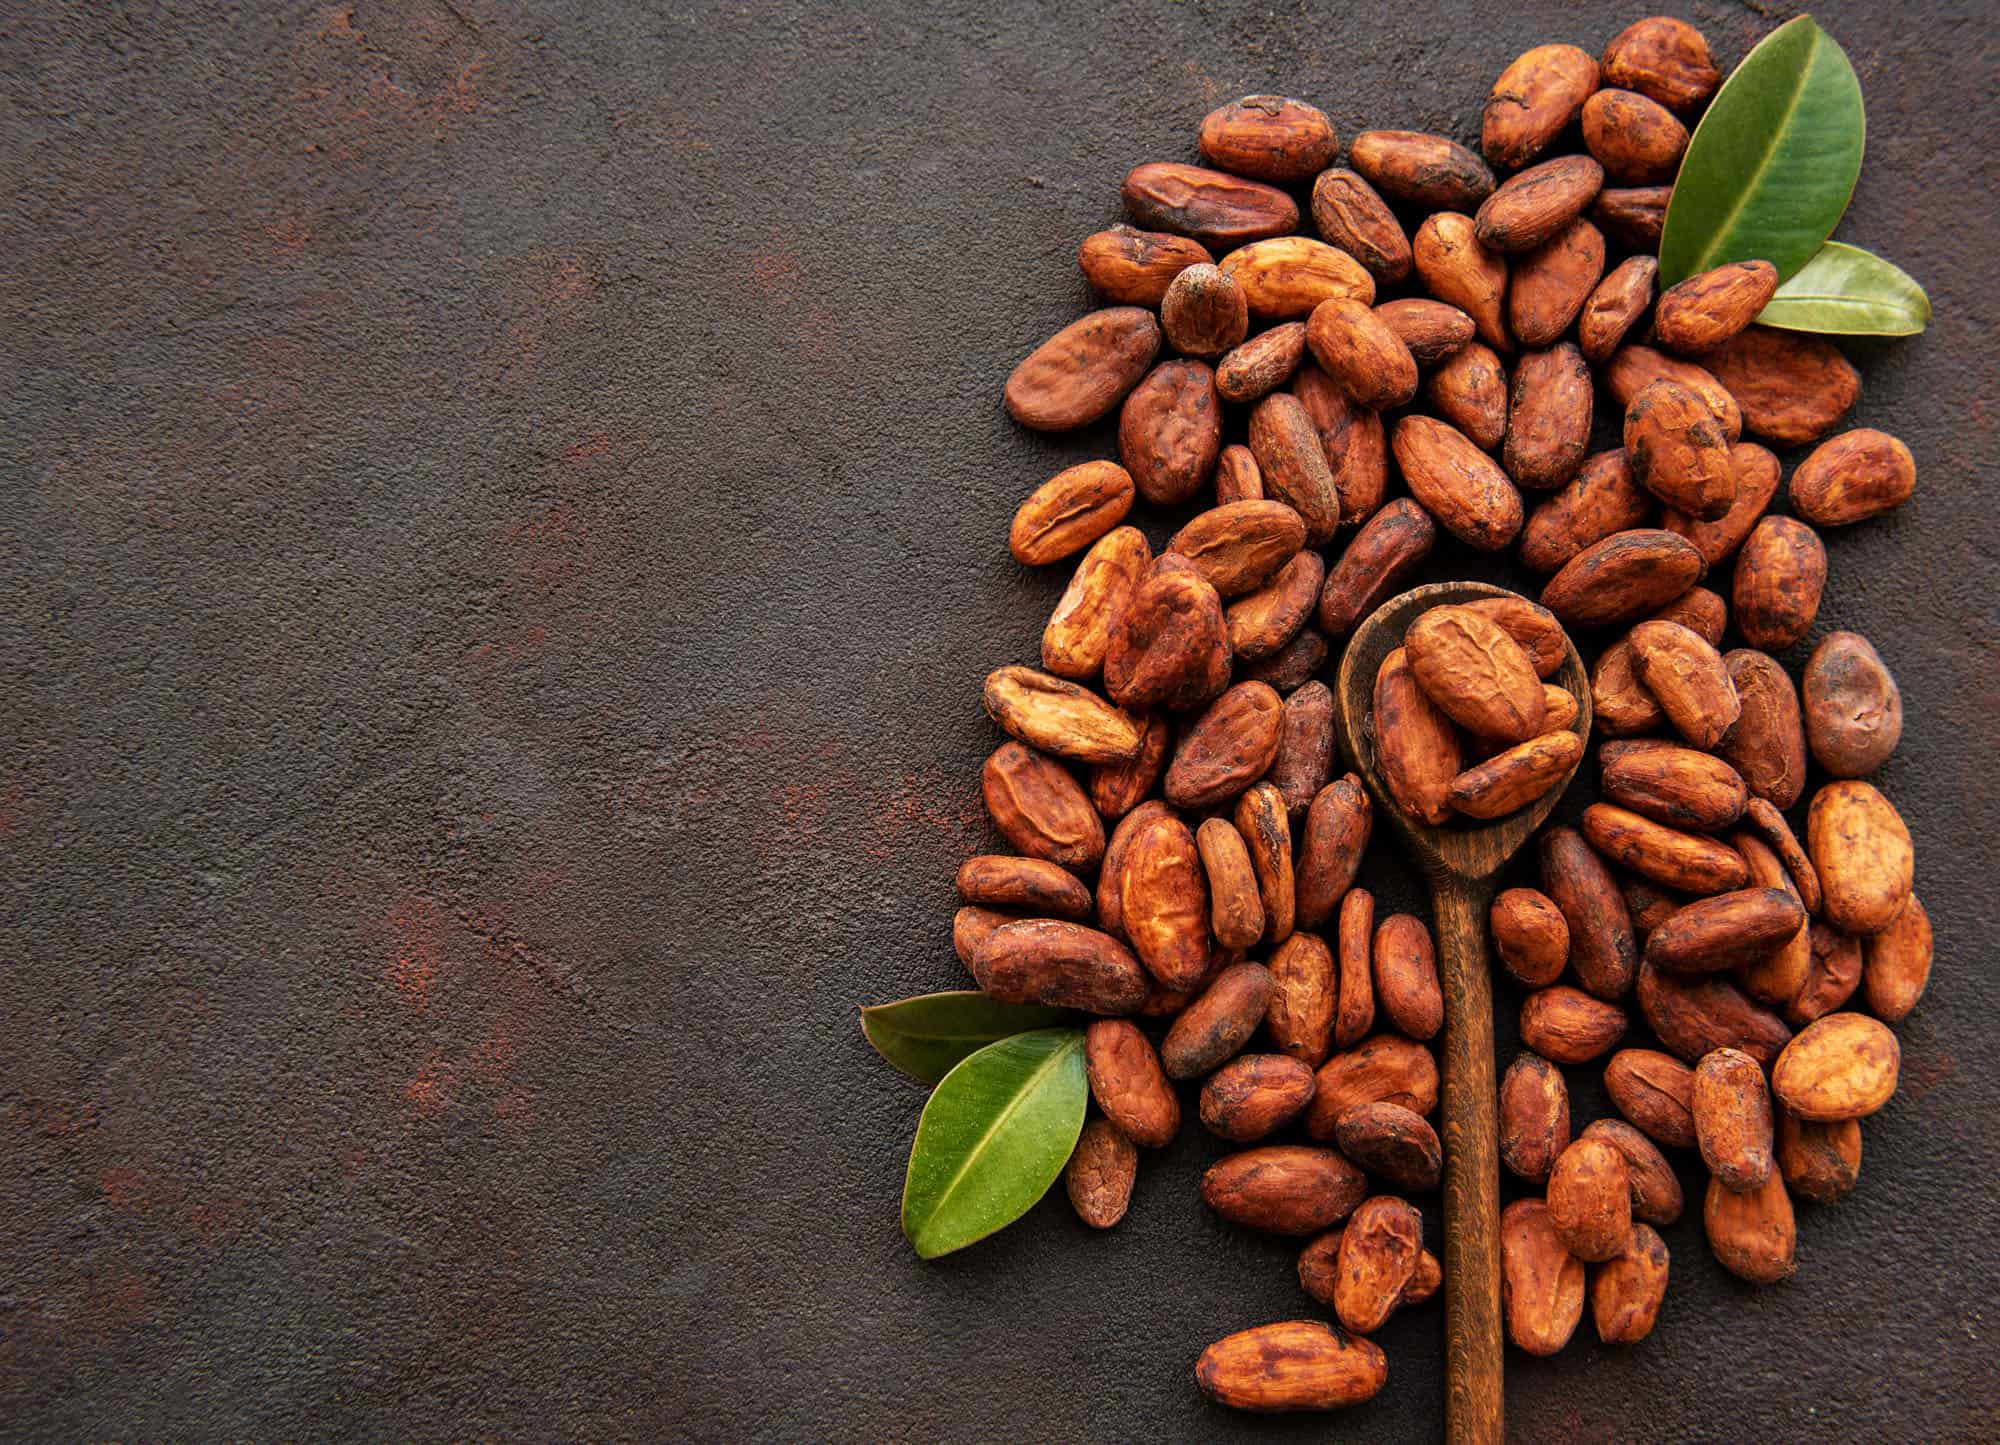 Raw Cocoa beans on a dark concrete background